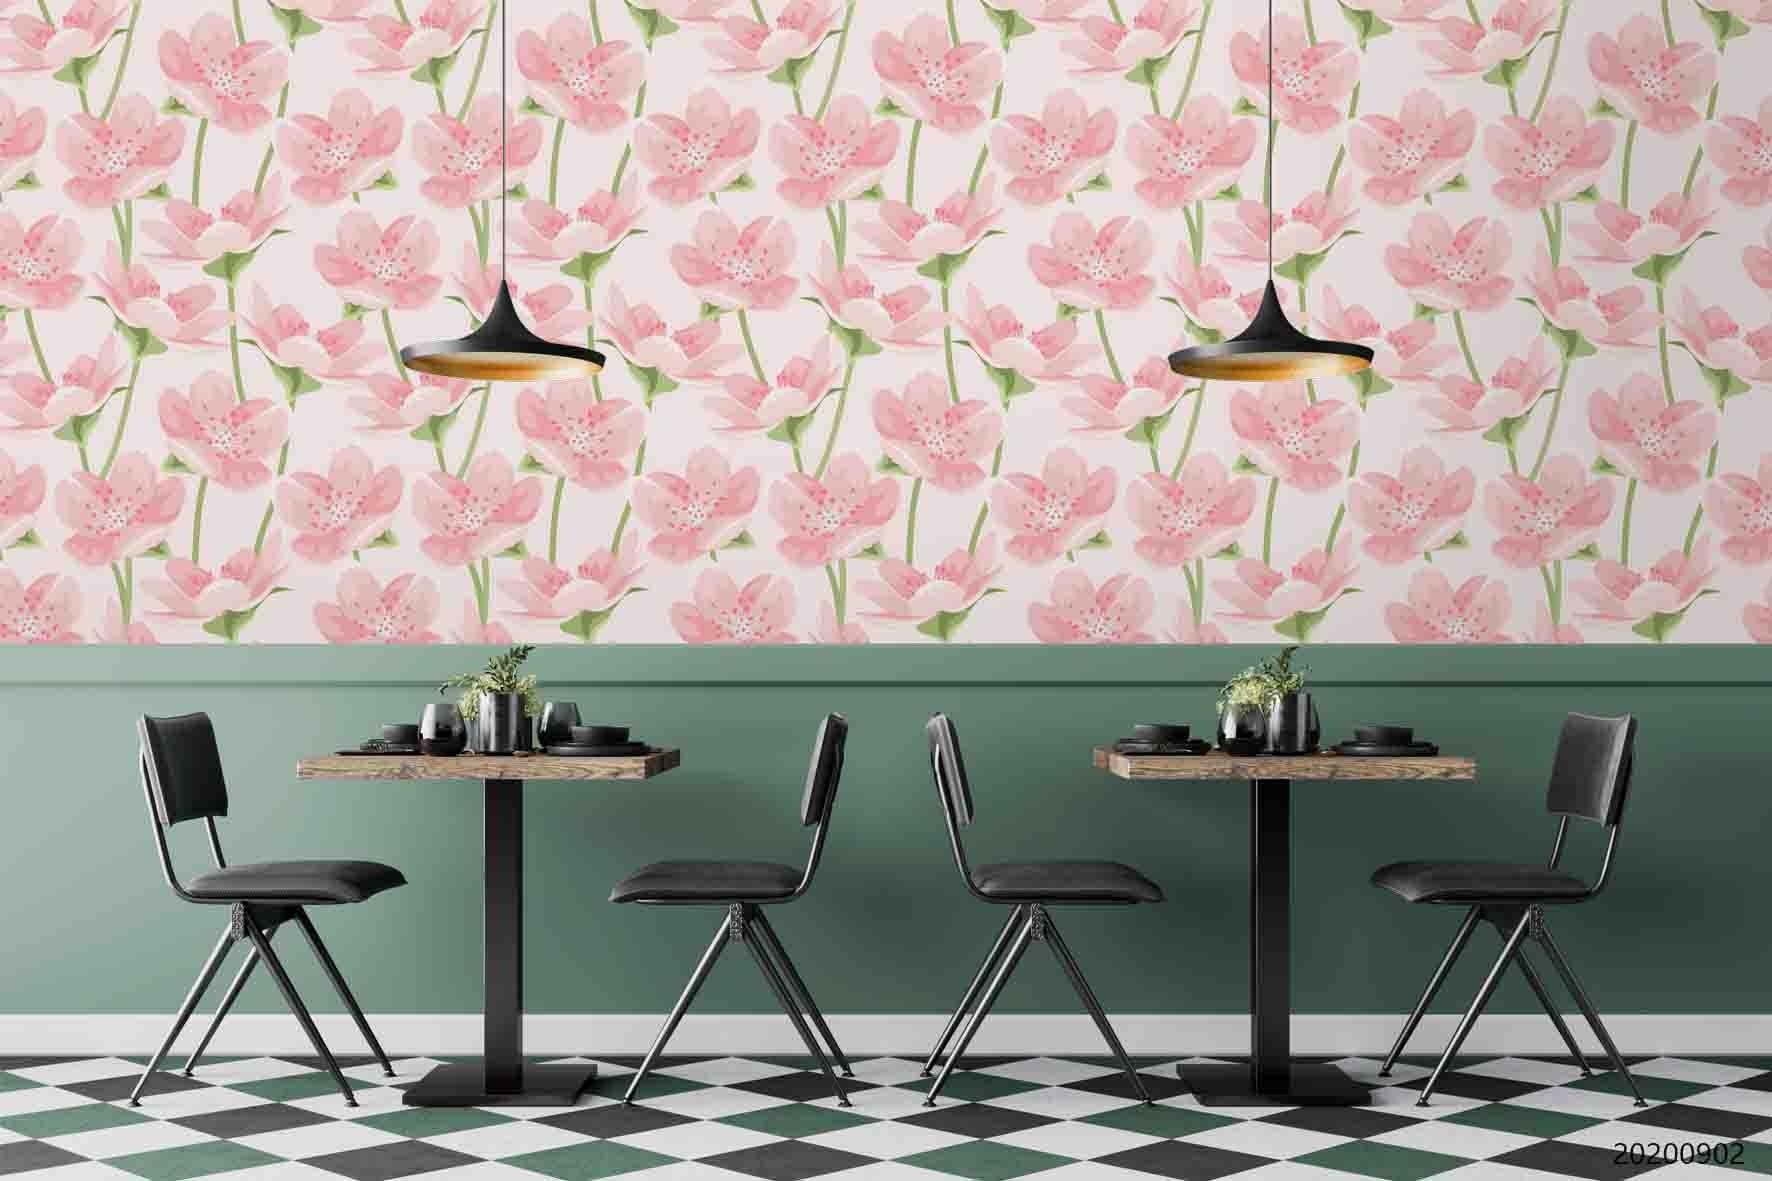 3D Hand Sketching Pink Floral Leaves Plant Wall Mural Wallpaper LXL 1267- Jess Art Decoration